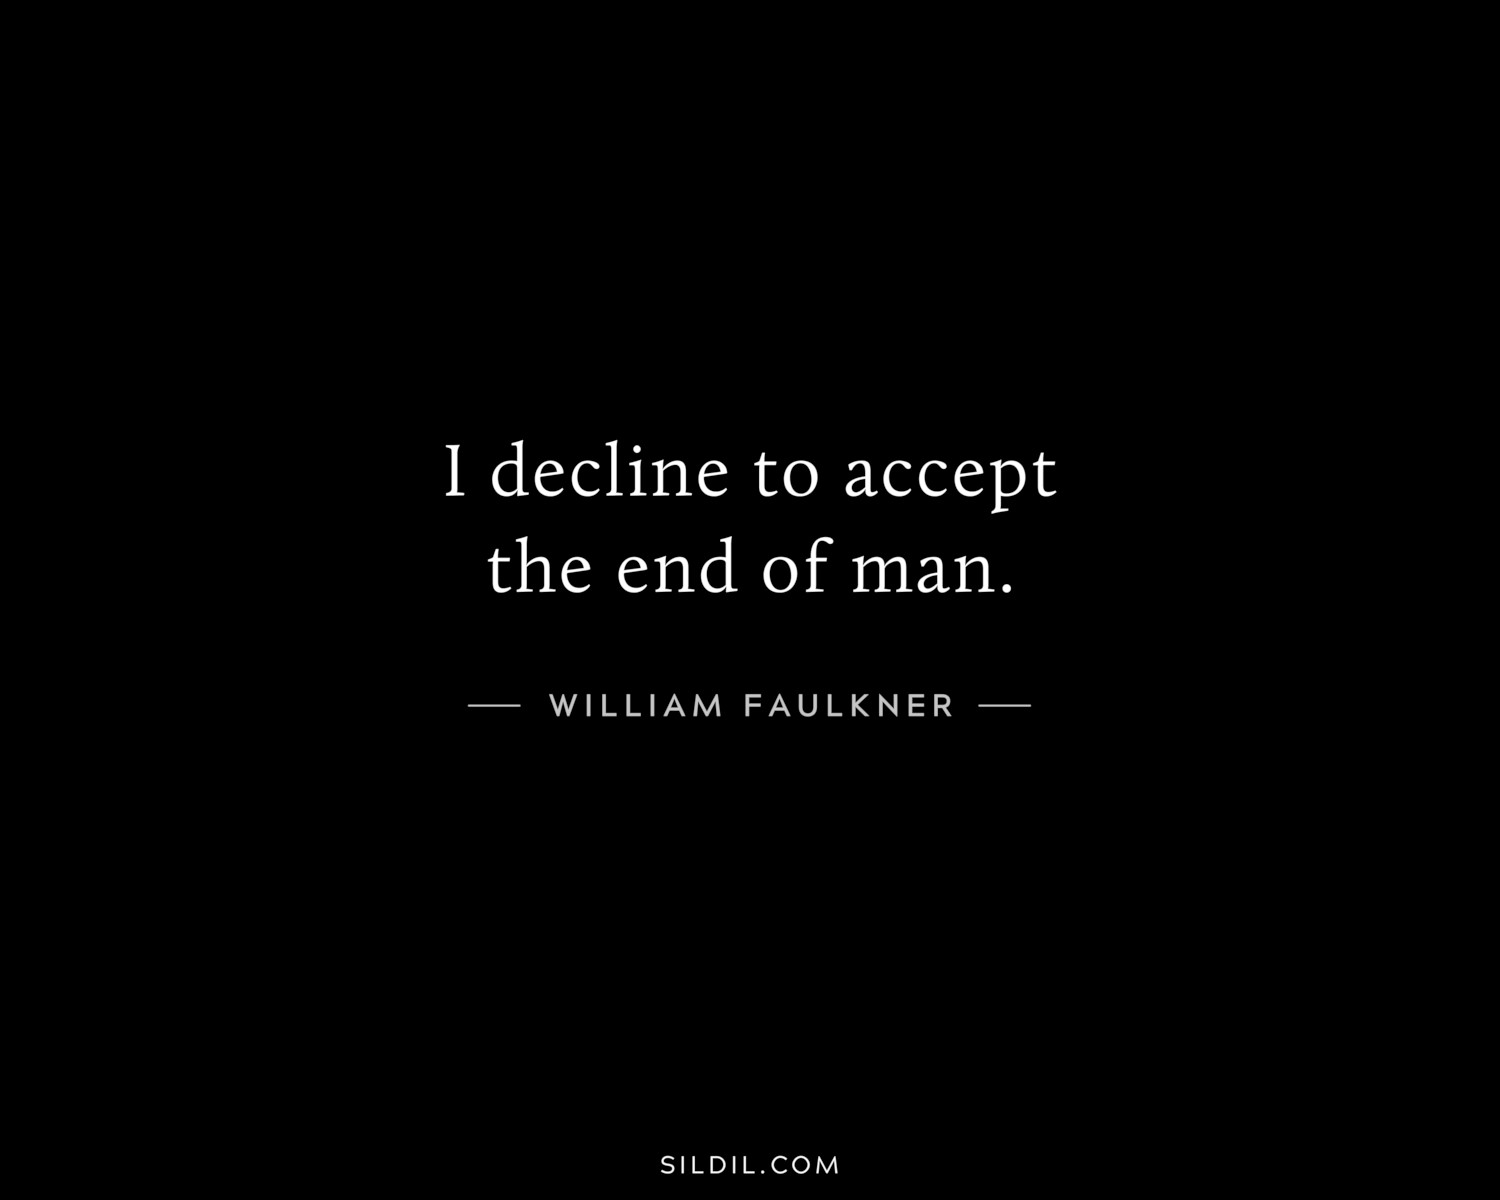 I decline to accept the end of man.